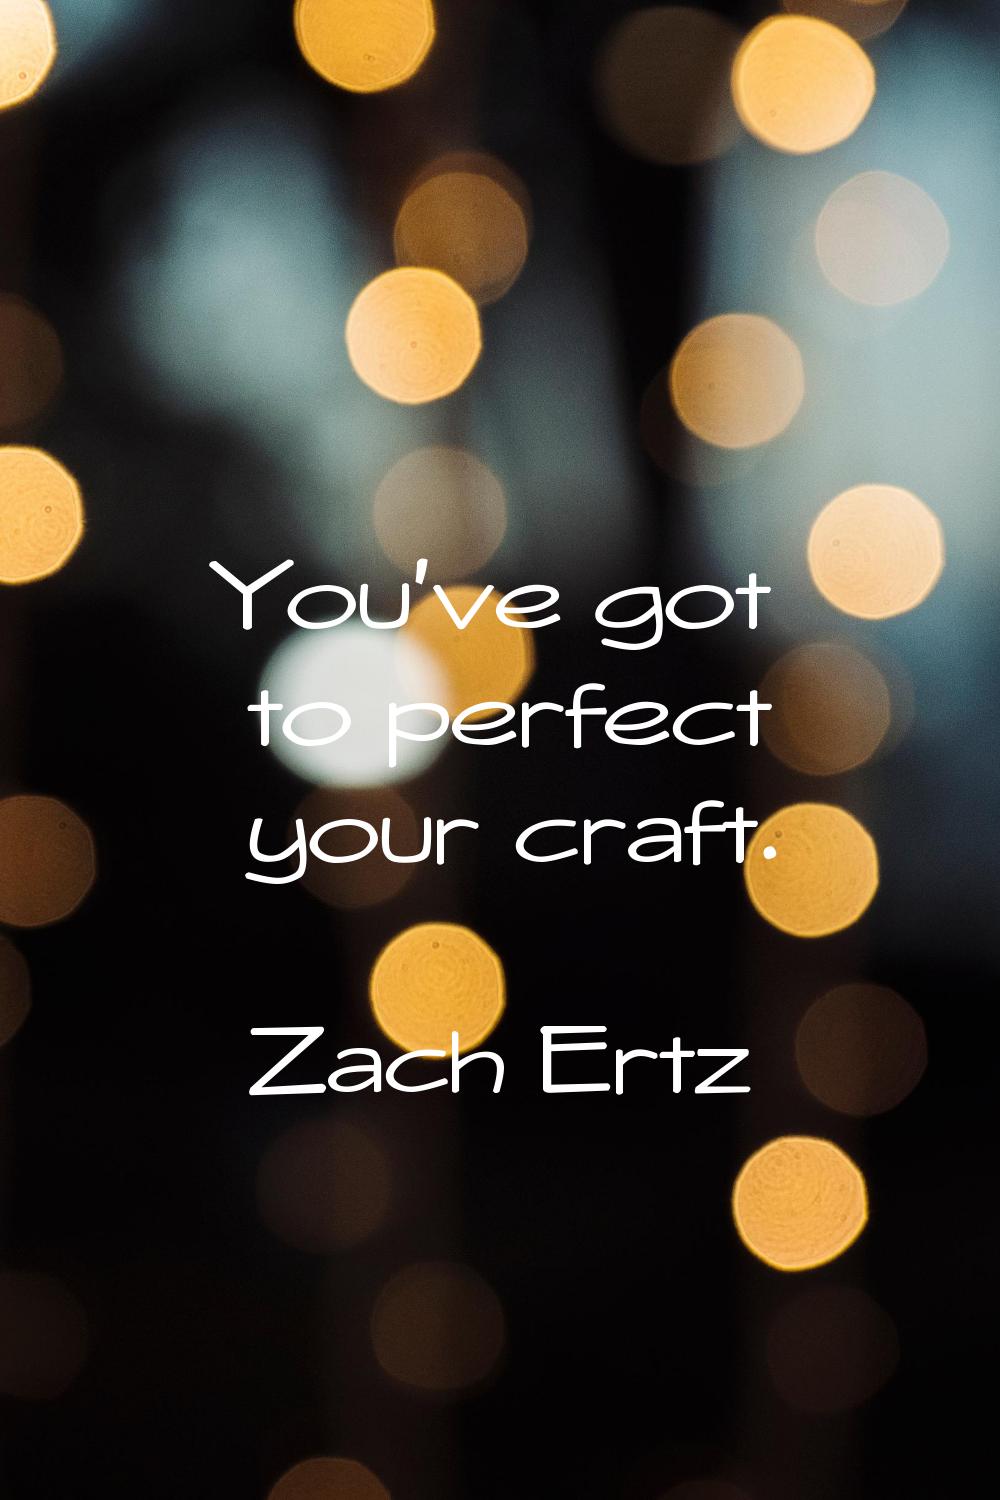 You've got to perfect your craft.